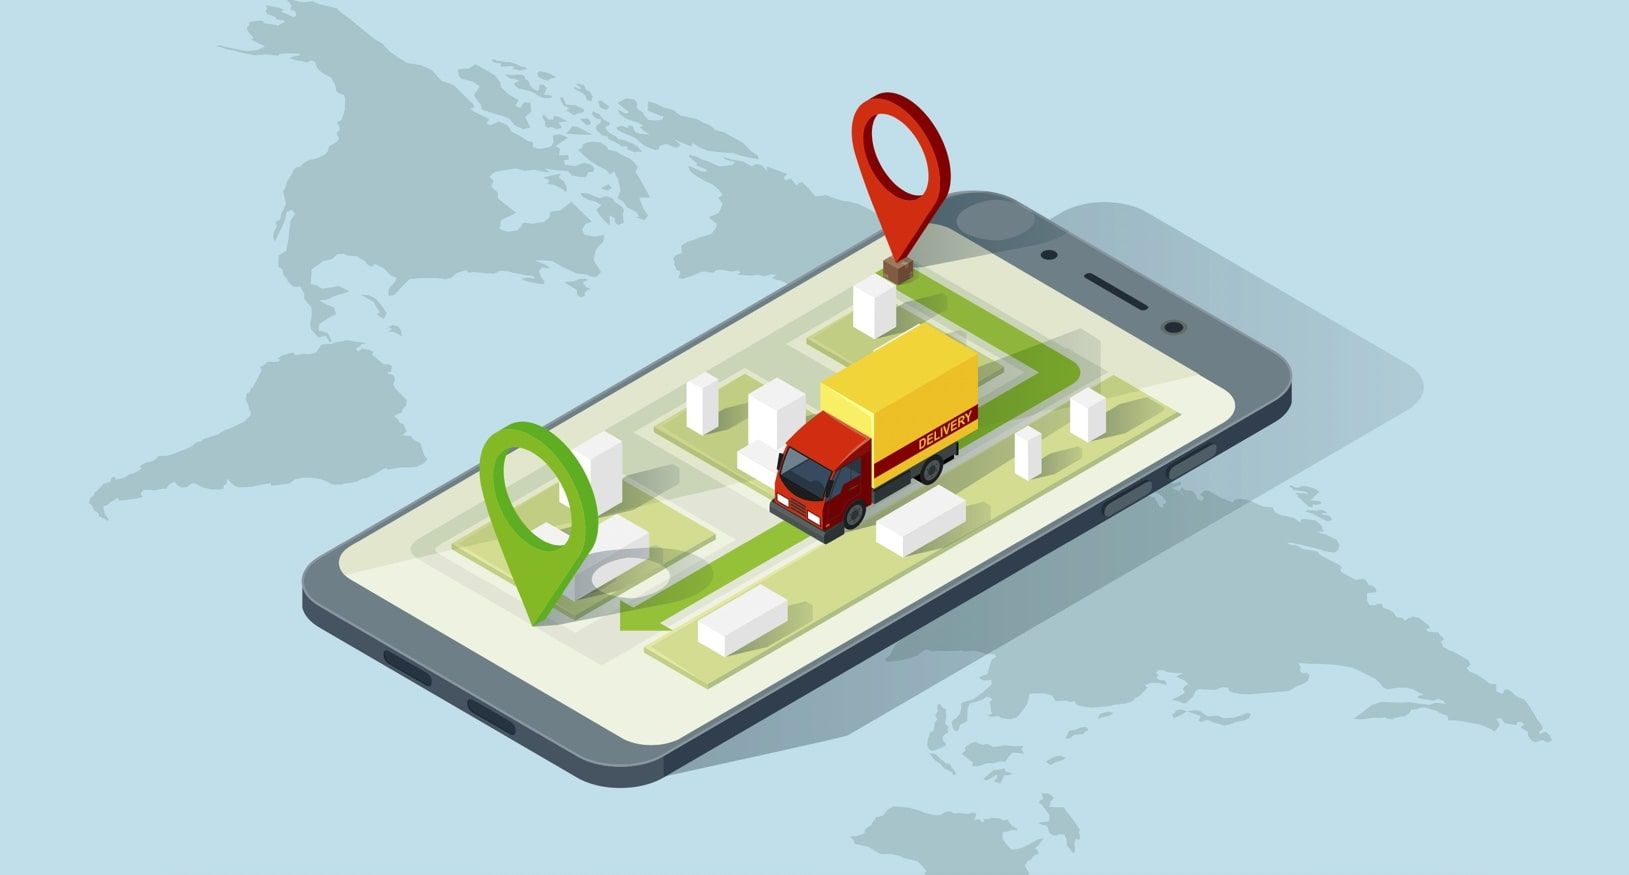 An illustration of a delivery truck driving on a map on a smartphone screen with a world map in the background